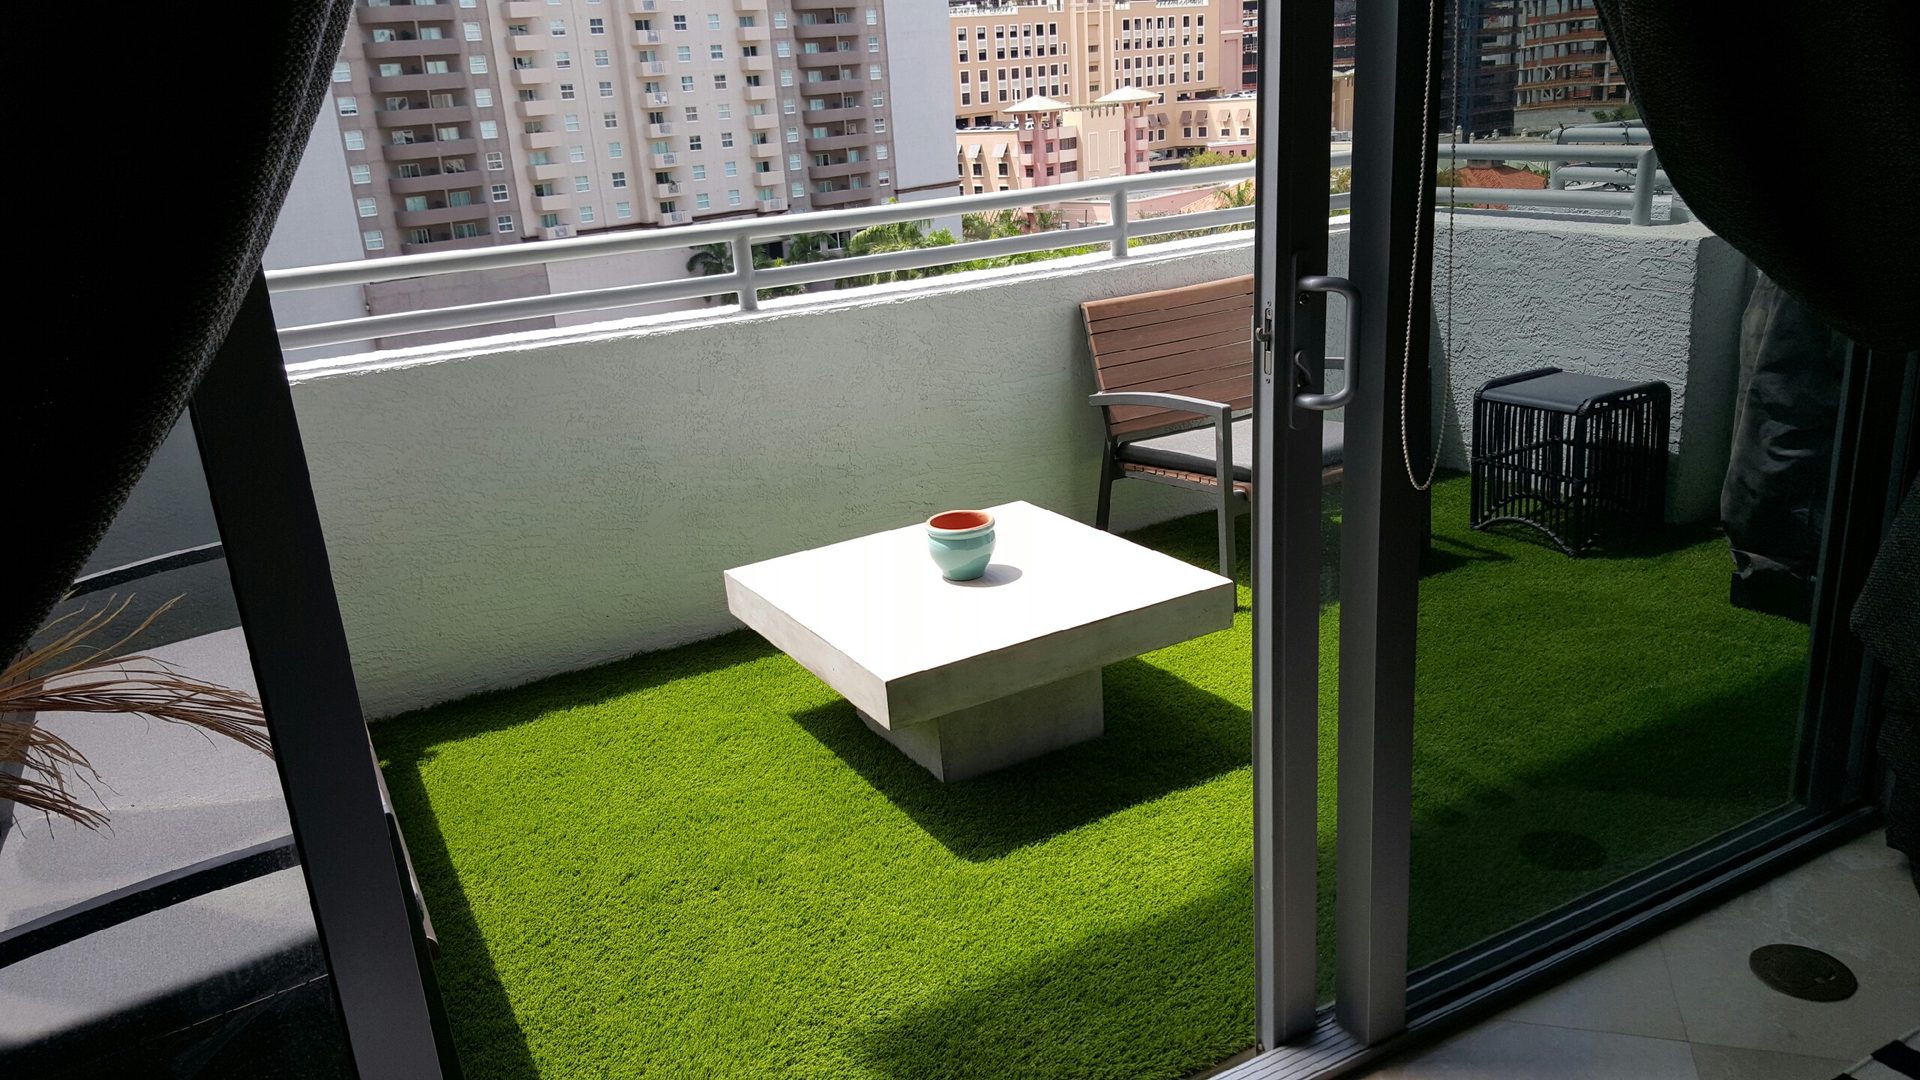 A balcony with grass flooring